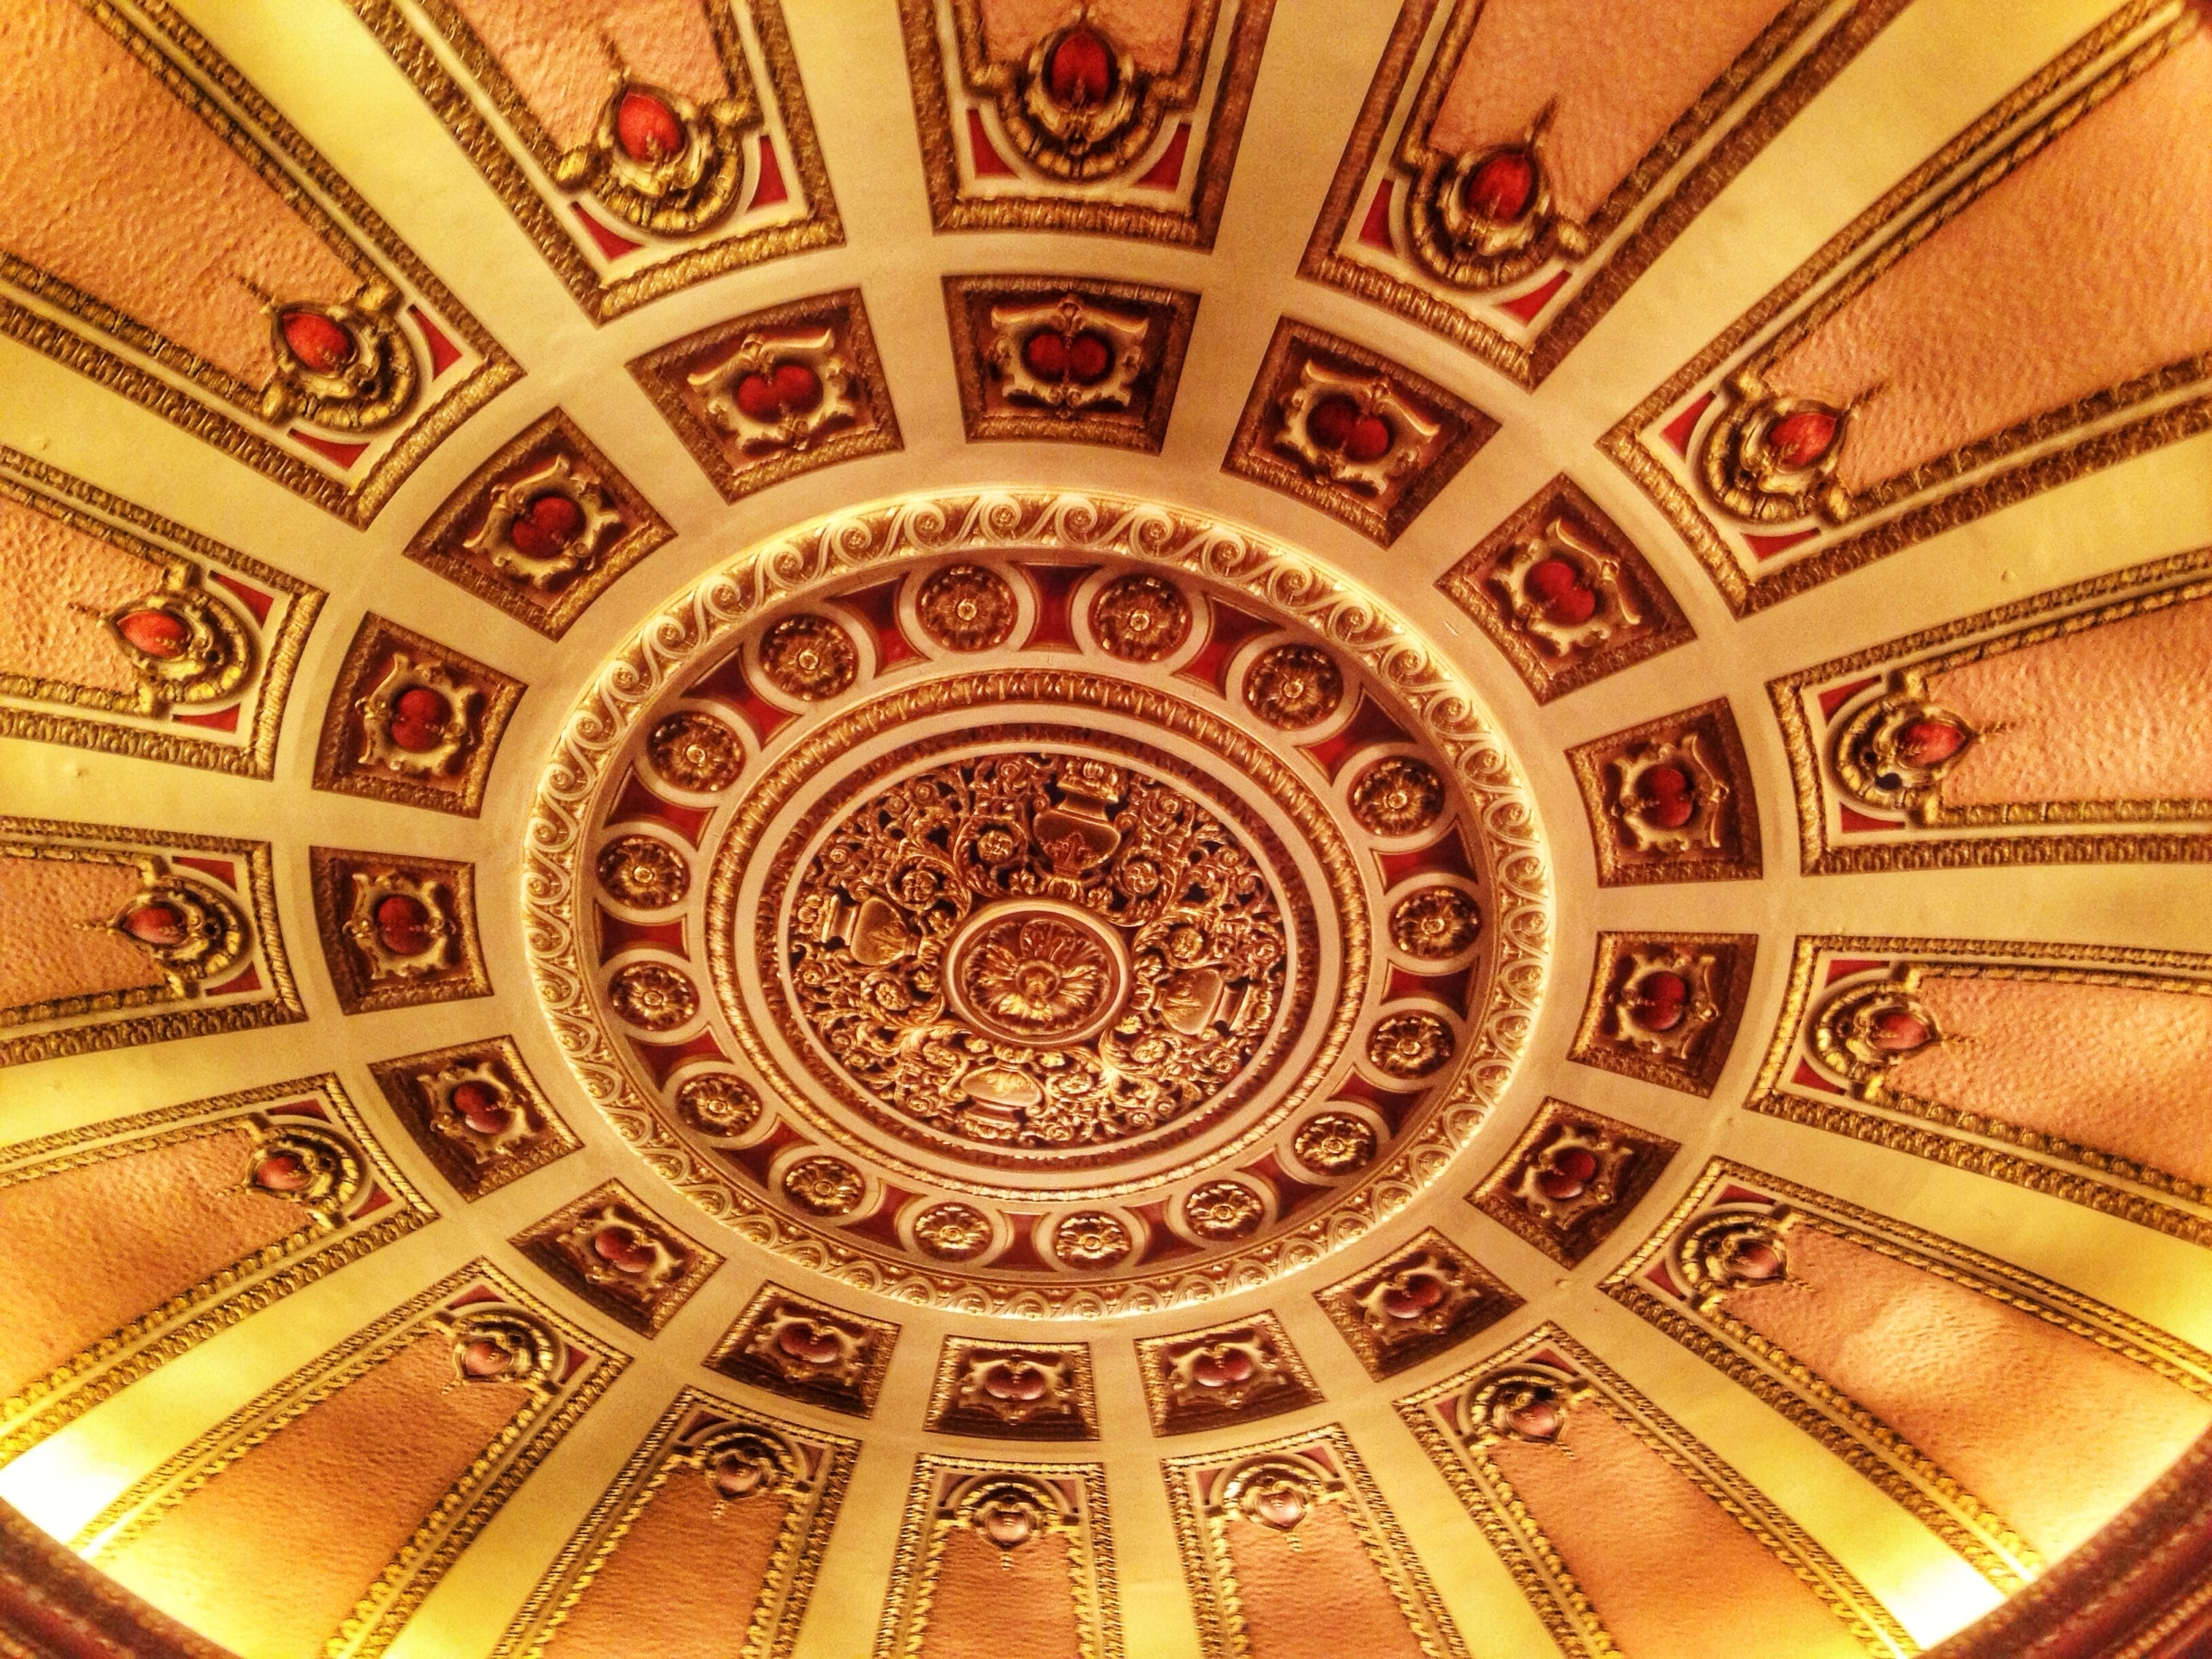 Ceiling of the Cadillac palace ...great place to see a show.